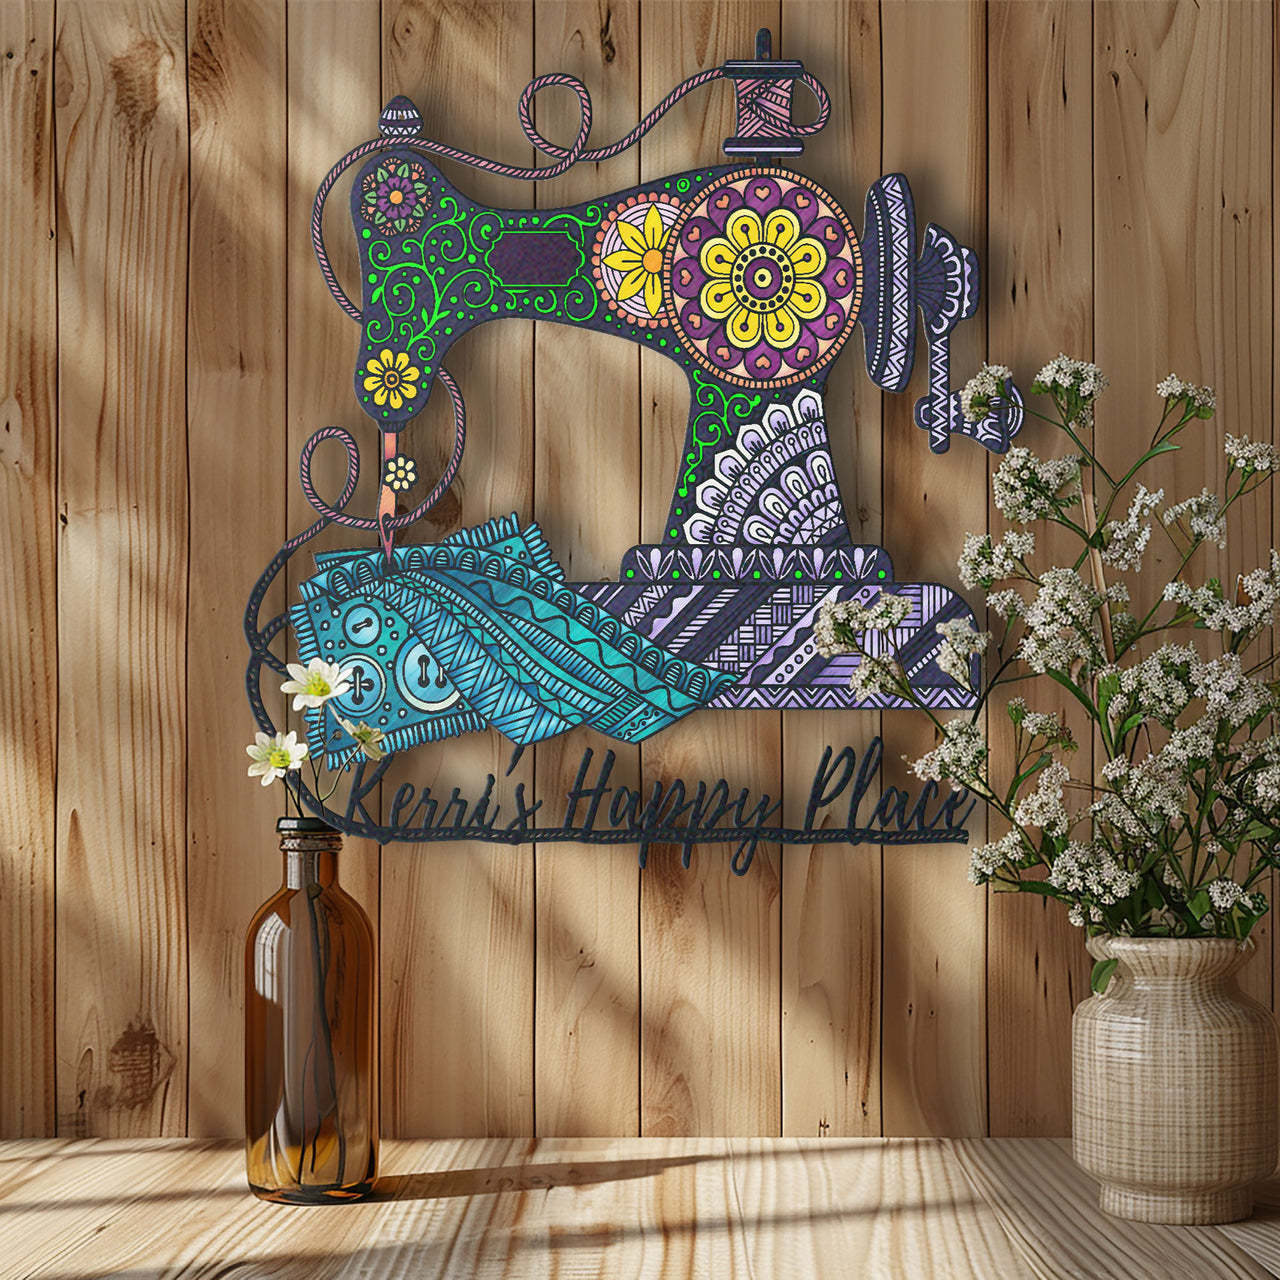 Sewing Lovers Full-color Metal Sign  Name Nana's Happy Place for home decoration Personalized